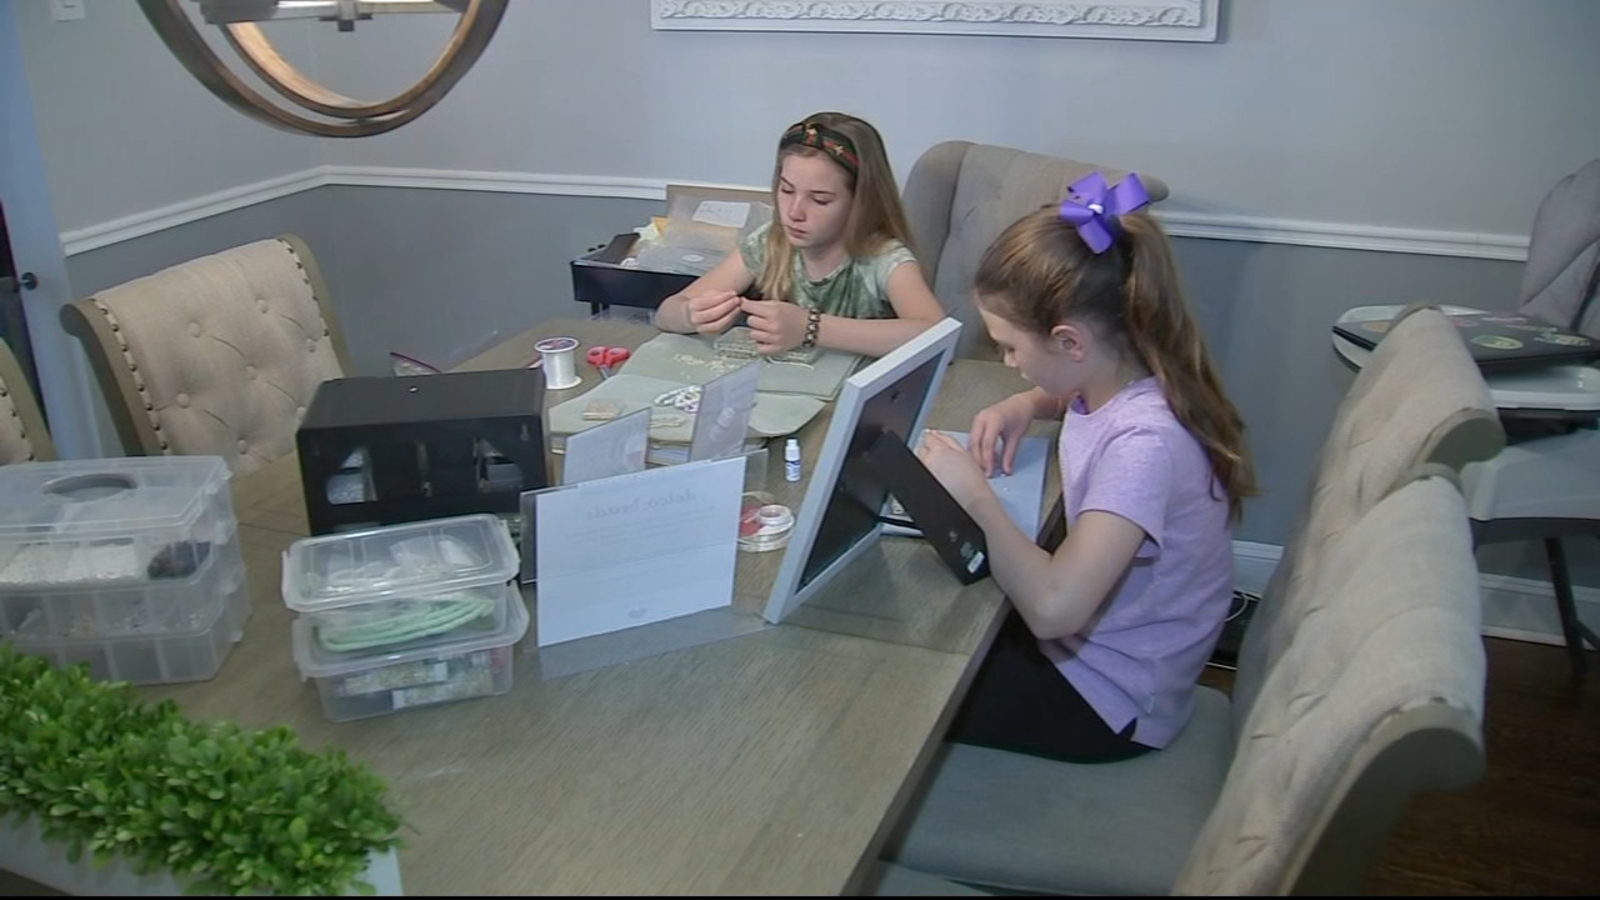   
																'Be Kind:' Delco sisters team up to make bracelets, help others 
															 